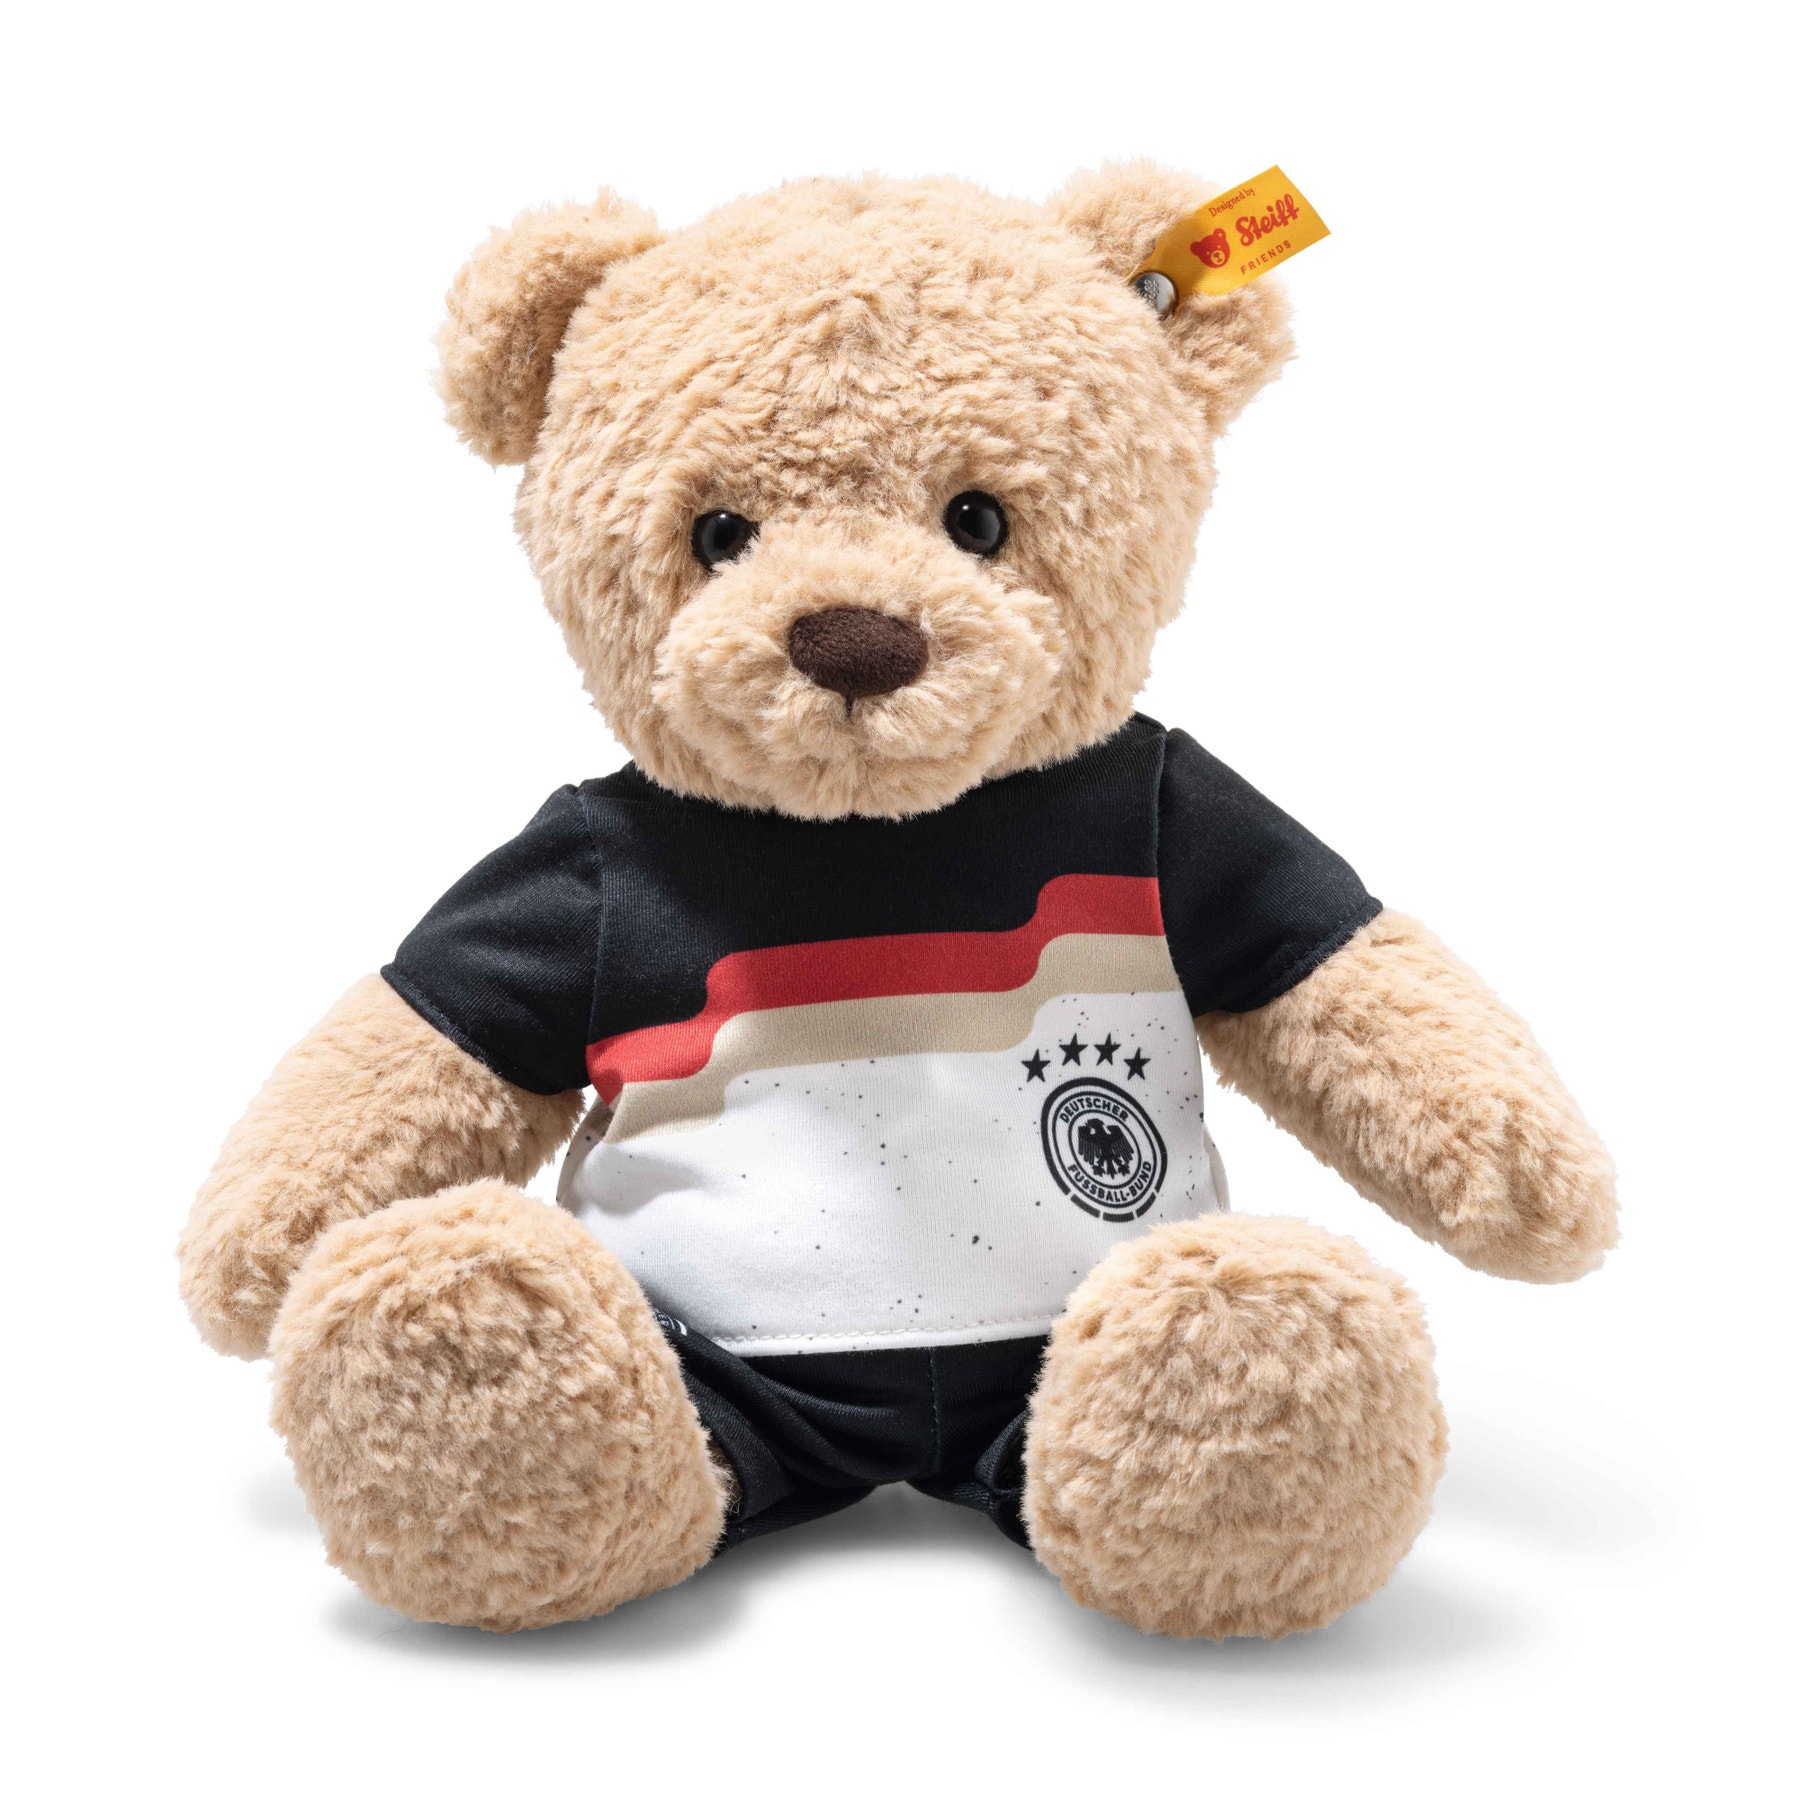 Ours Teddy Ben DFB édition